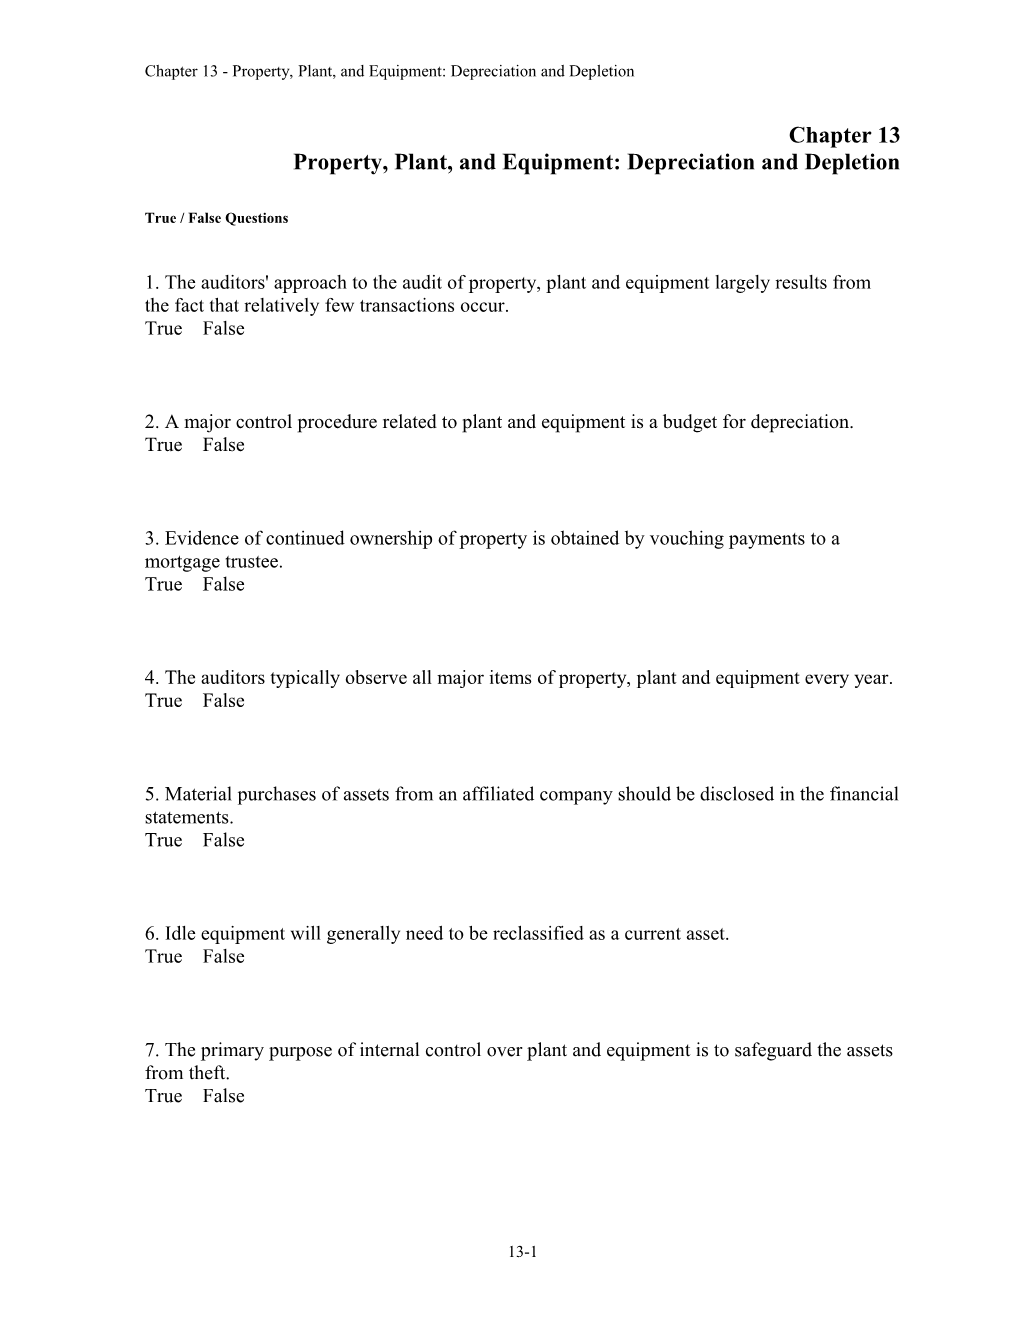 Chapter 13 Property, Plant, and Equipment: Depreciation and Depletion